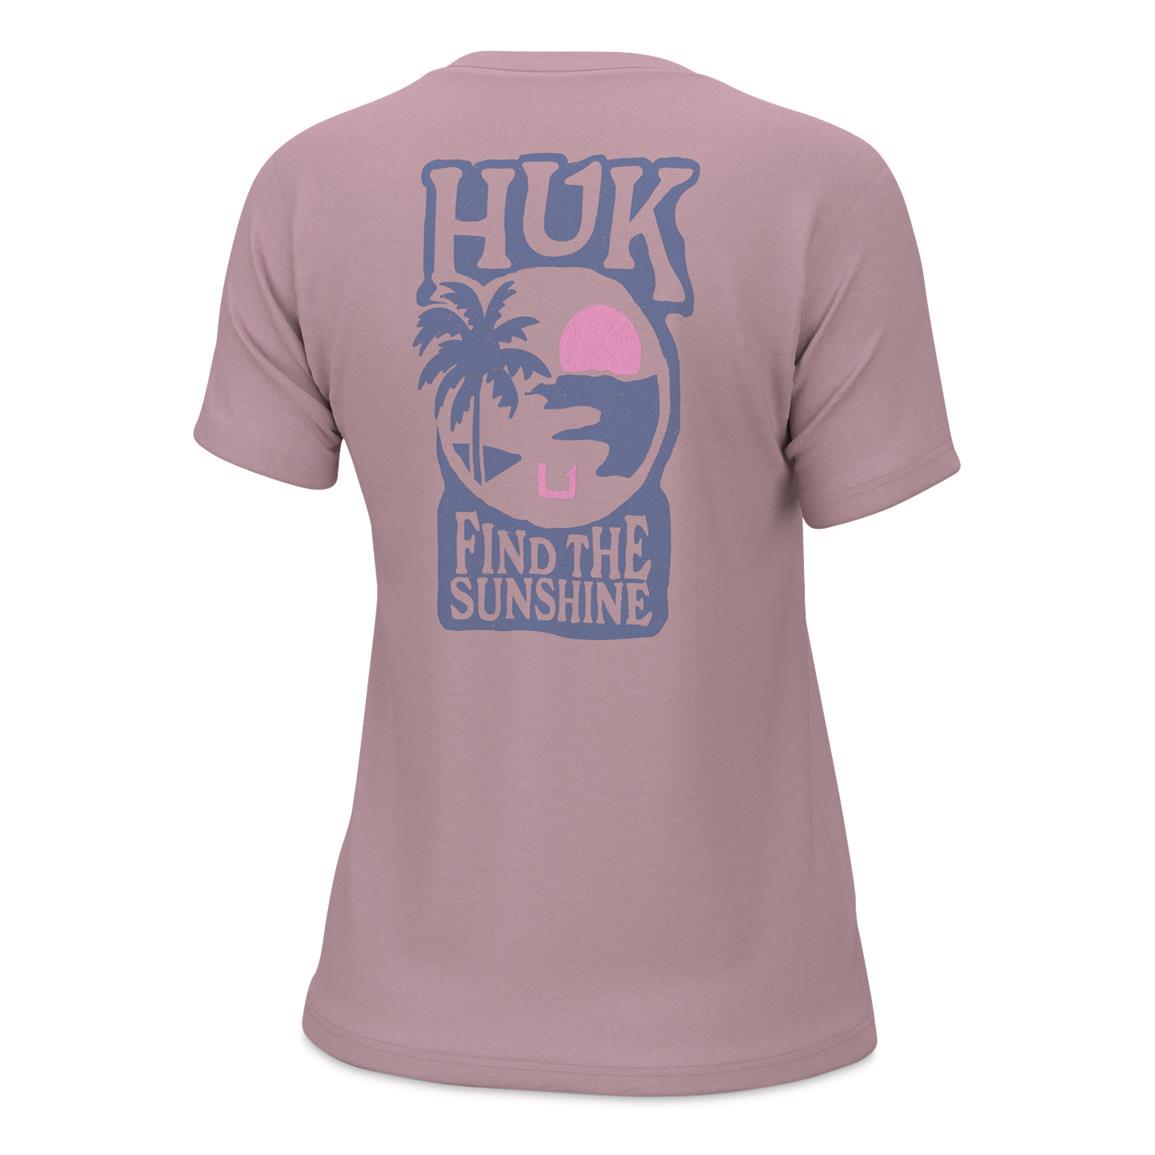 Huk Women's Find the Sun Tee, Winsome Orchid